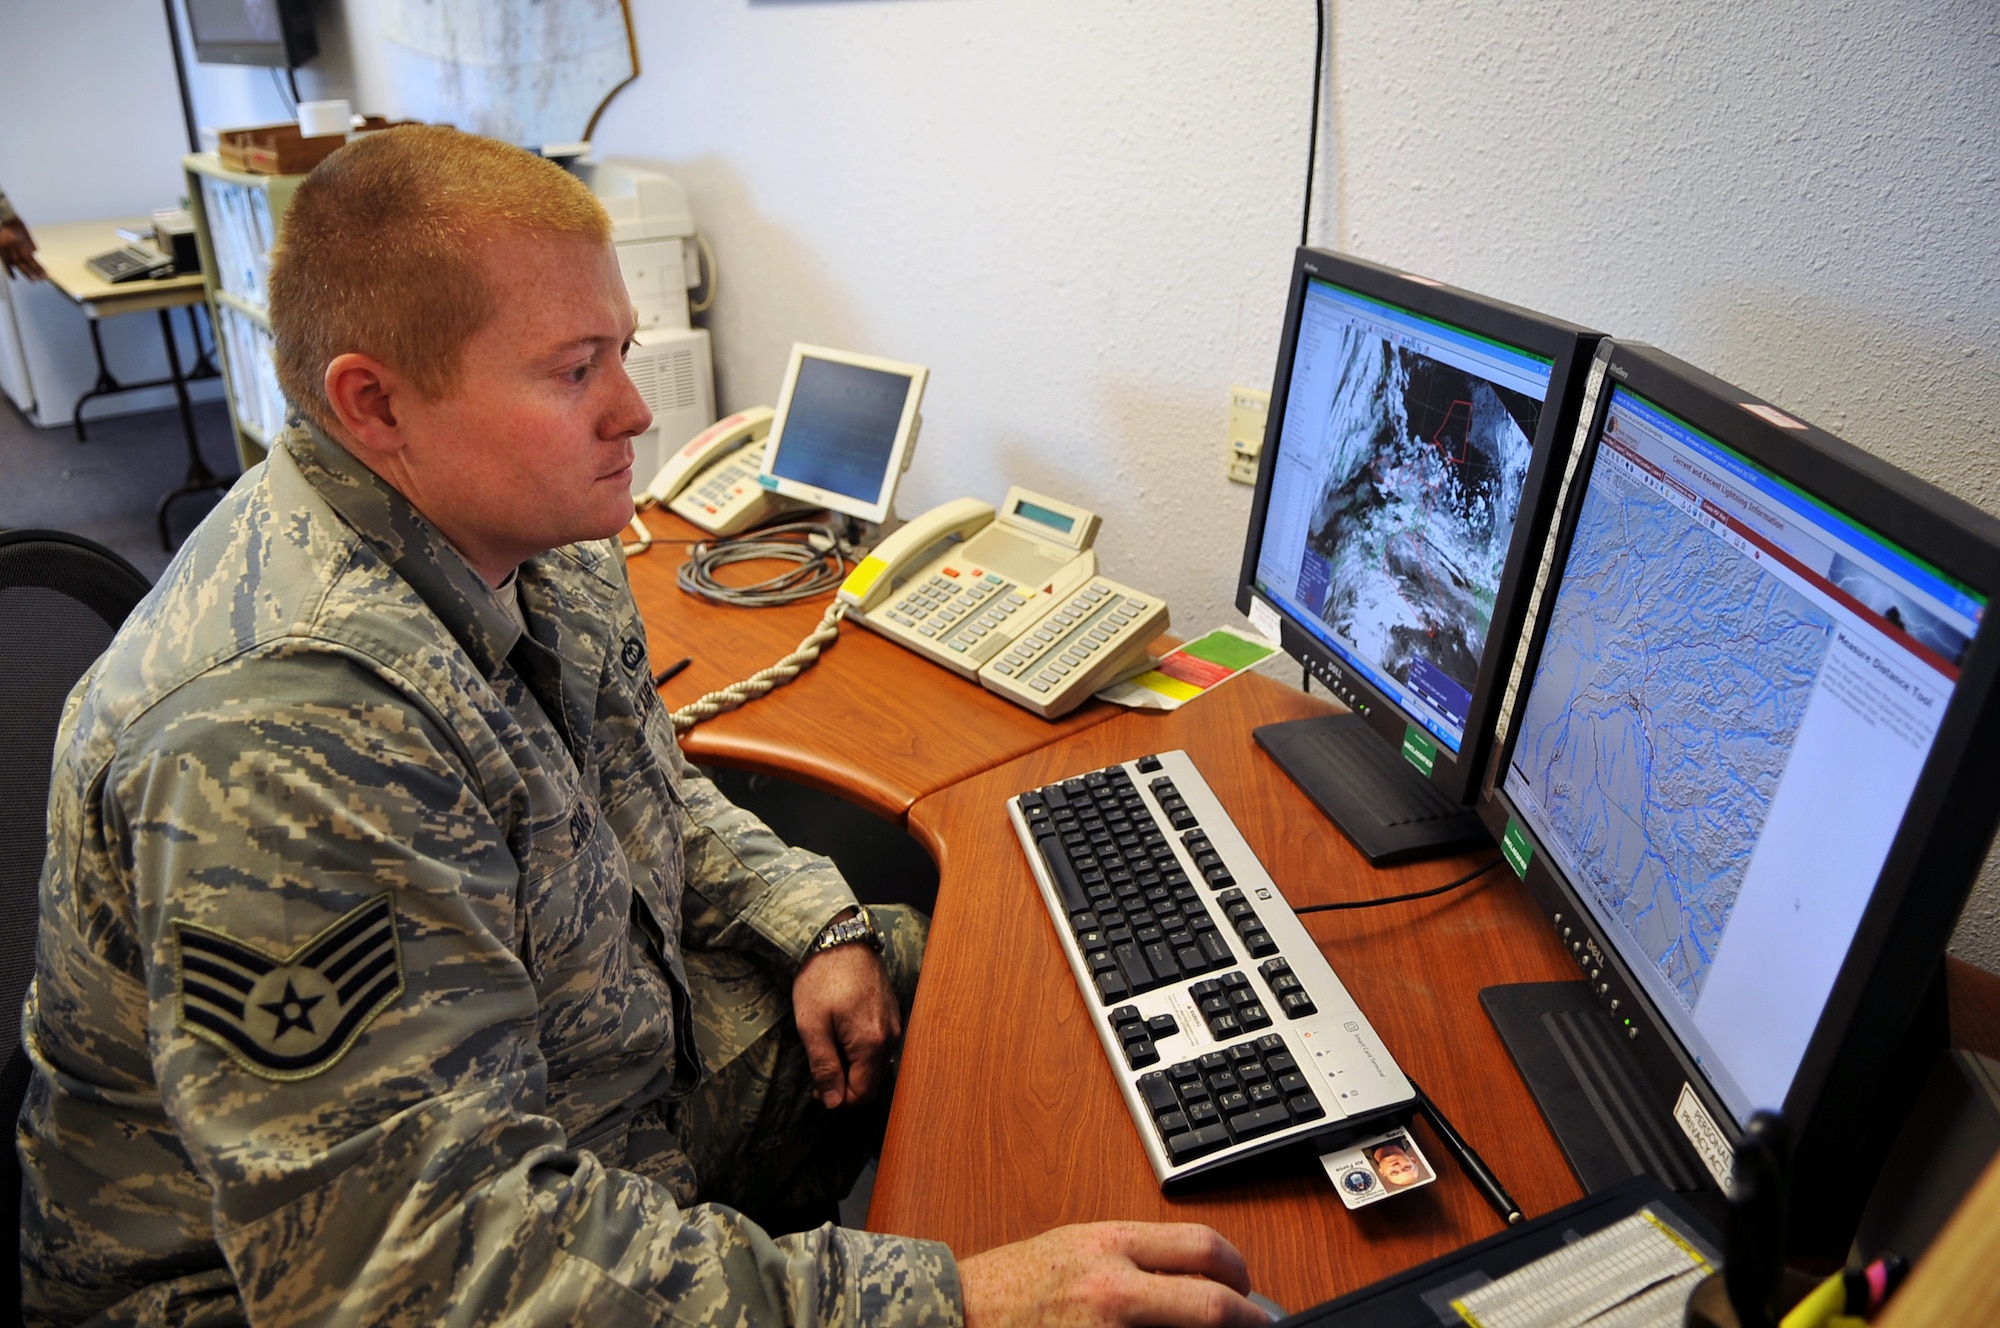 Air Force Staff Sgt. David Craig, weather forecaster with the 611th Air and Space Operations Center, looks over weather data June 17 at the weather flight office on Elmendorf Air Force Base, Alaska. (U.S. Air Force photo/Master Sgt. Shane Cuomo)